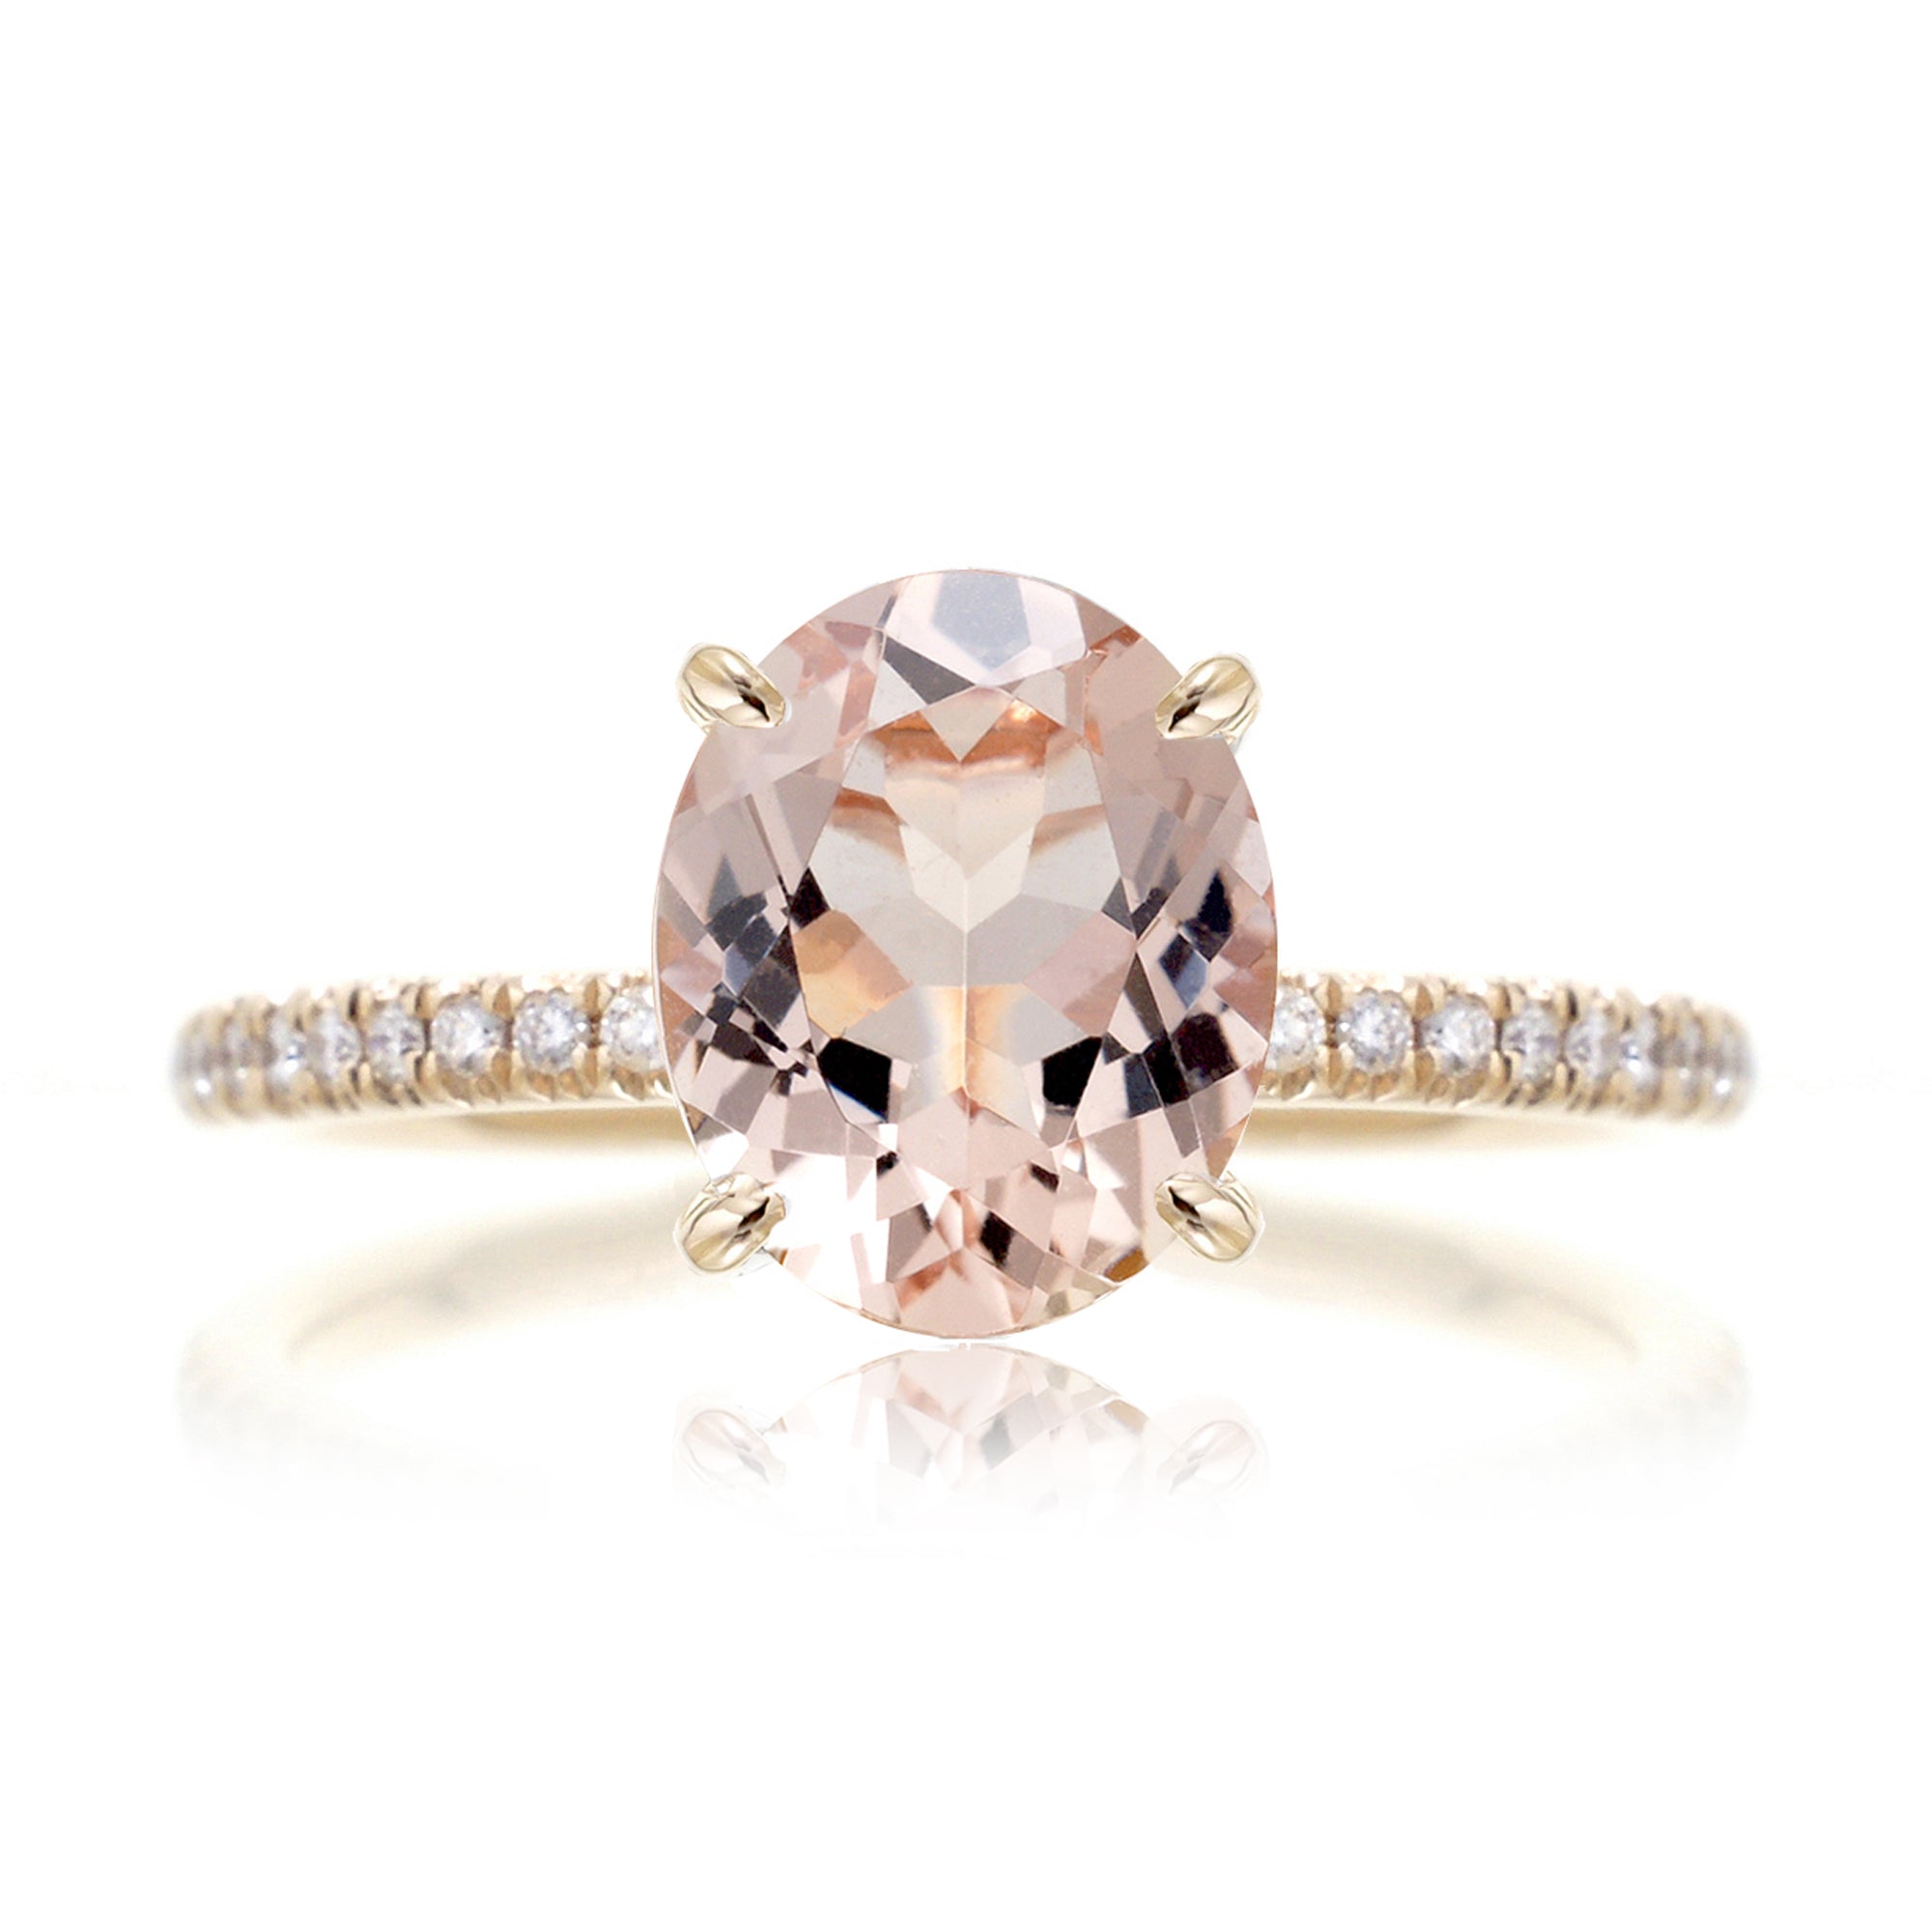 Oval morganite diamond band engagement ring yellow gold - The Ava